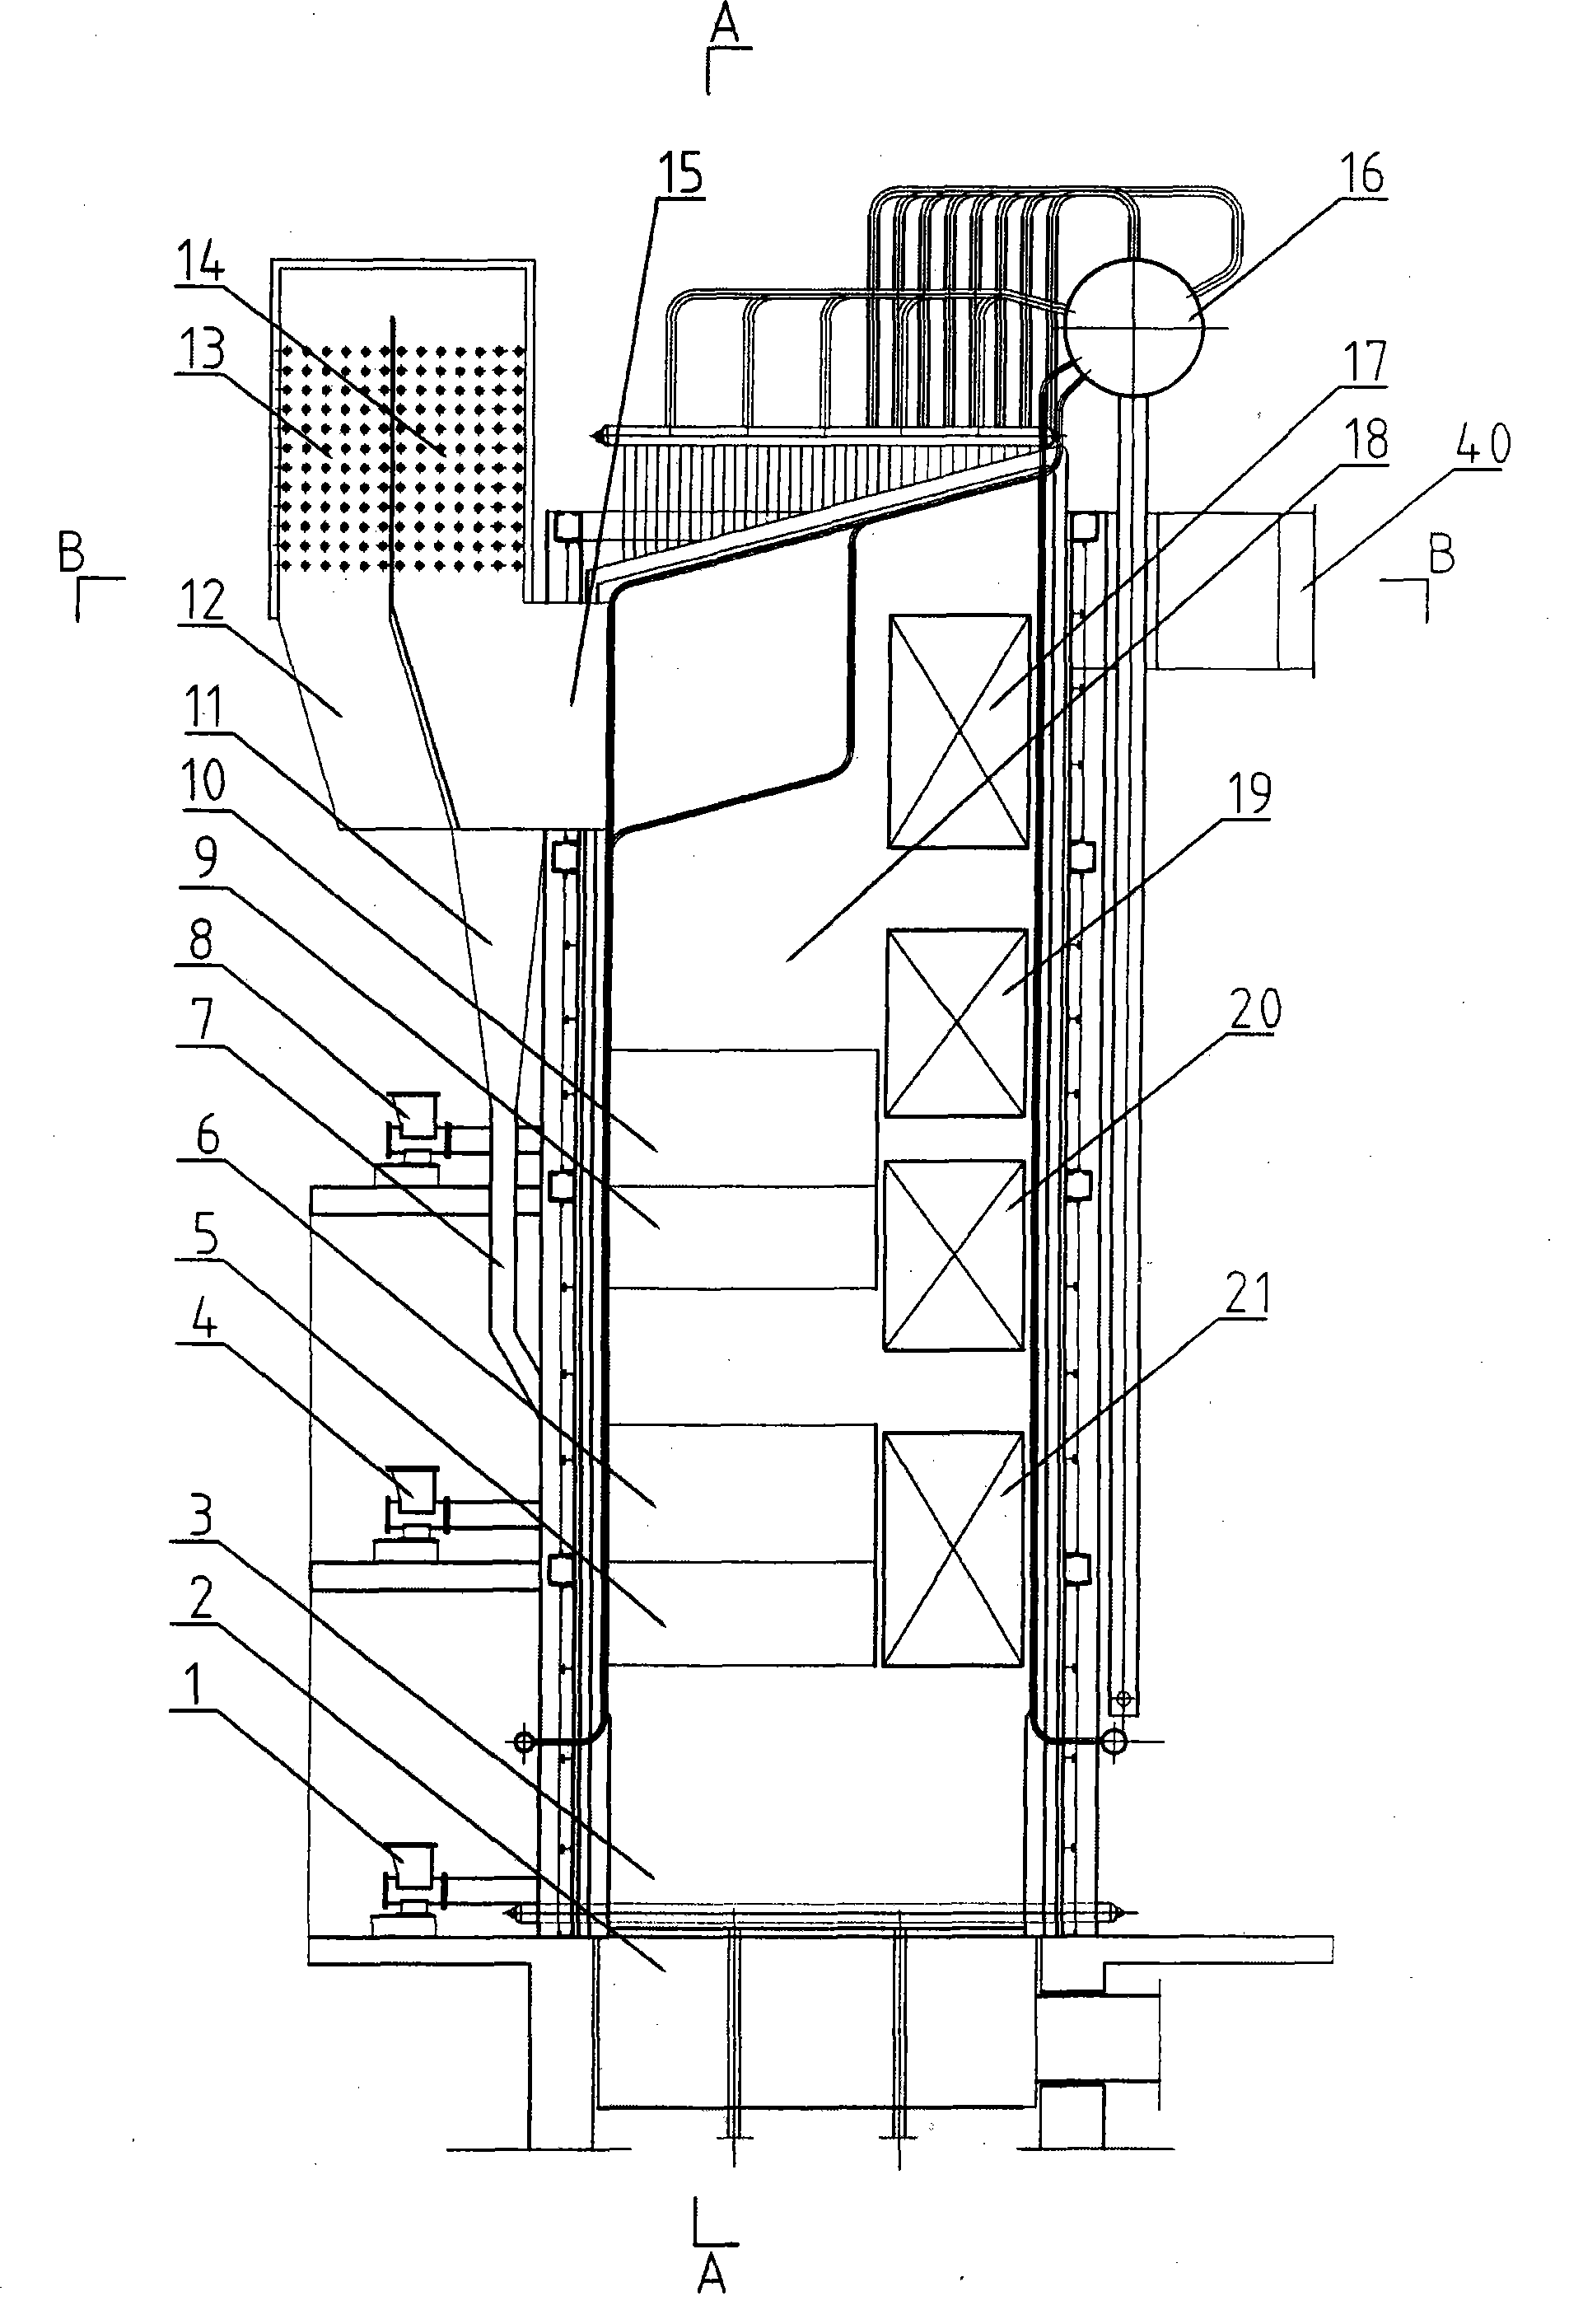 Composite-bed low circulation fluidized bed boiler